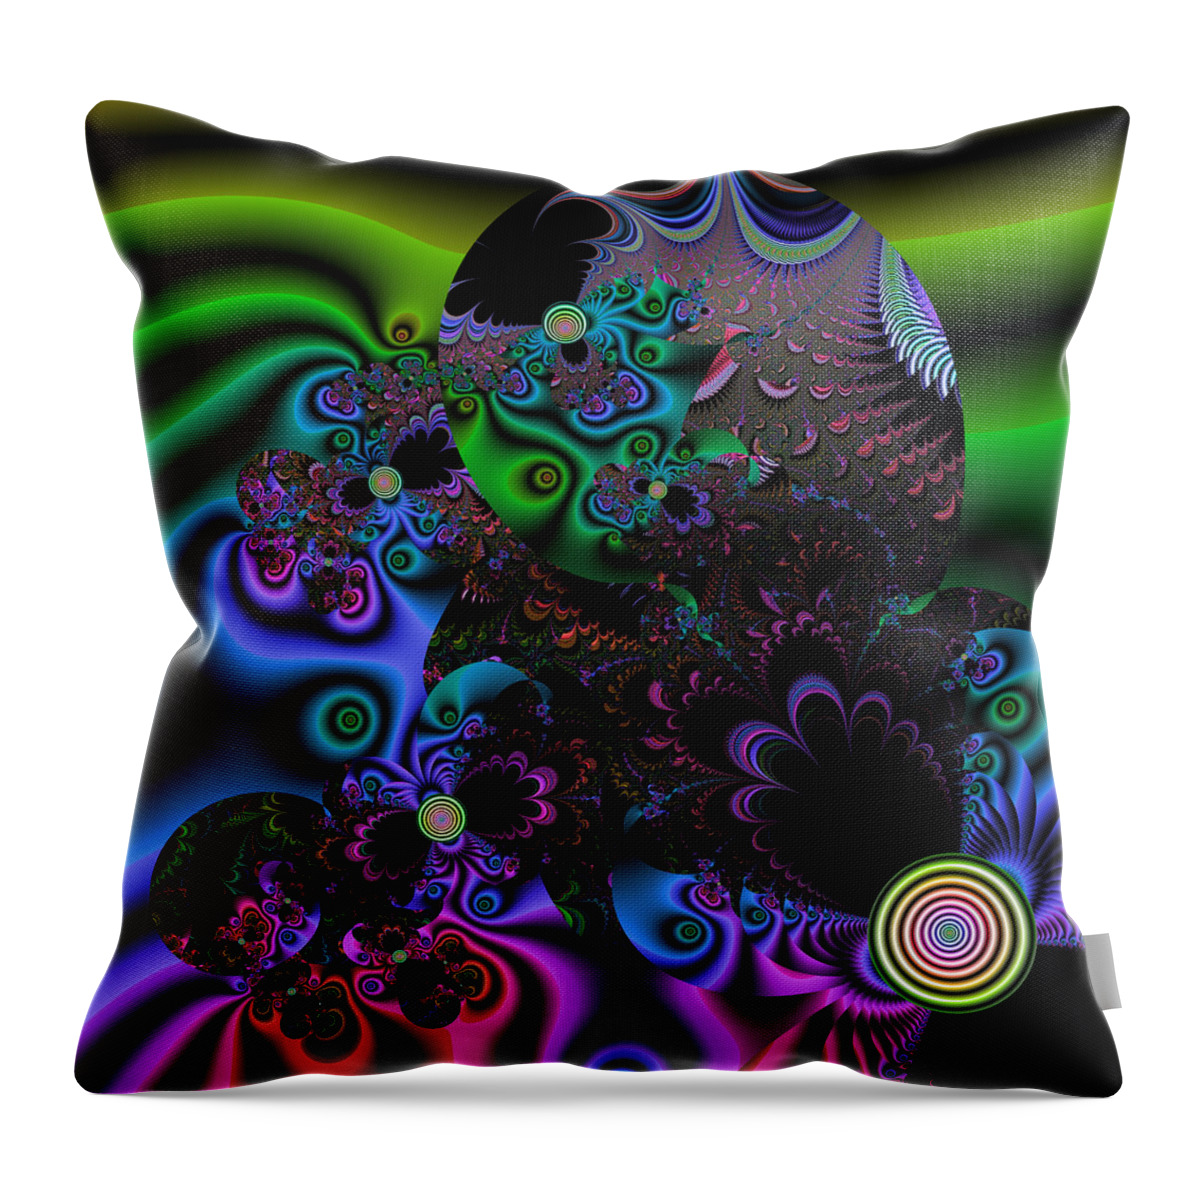 Abstract Throw Pillow featuring the digital art Sweatermen by Andrew Kotlinski